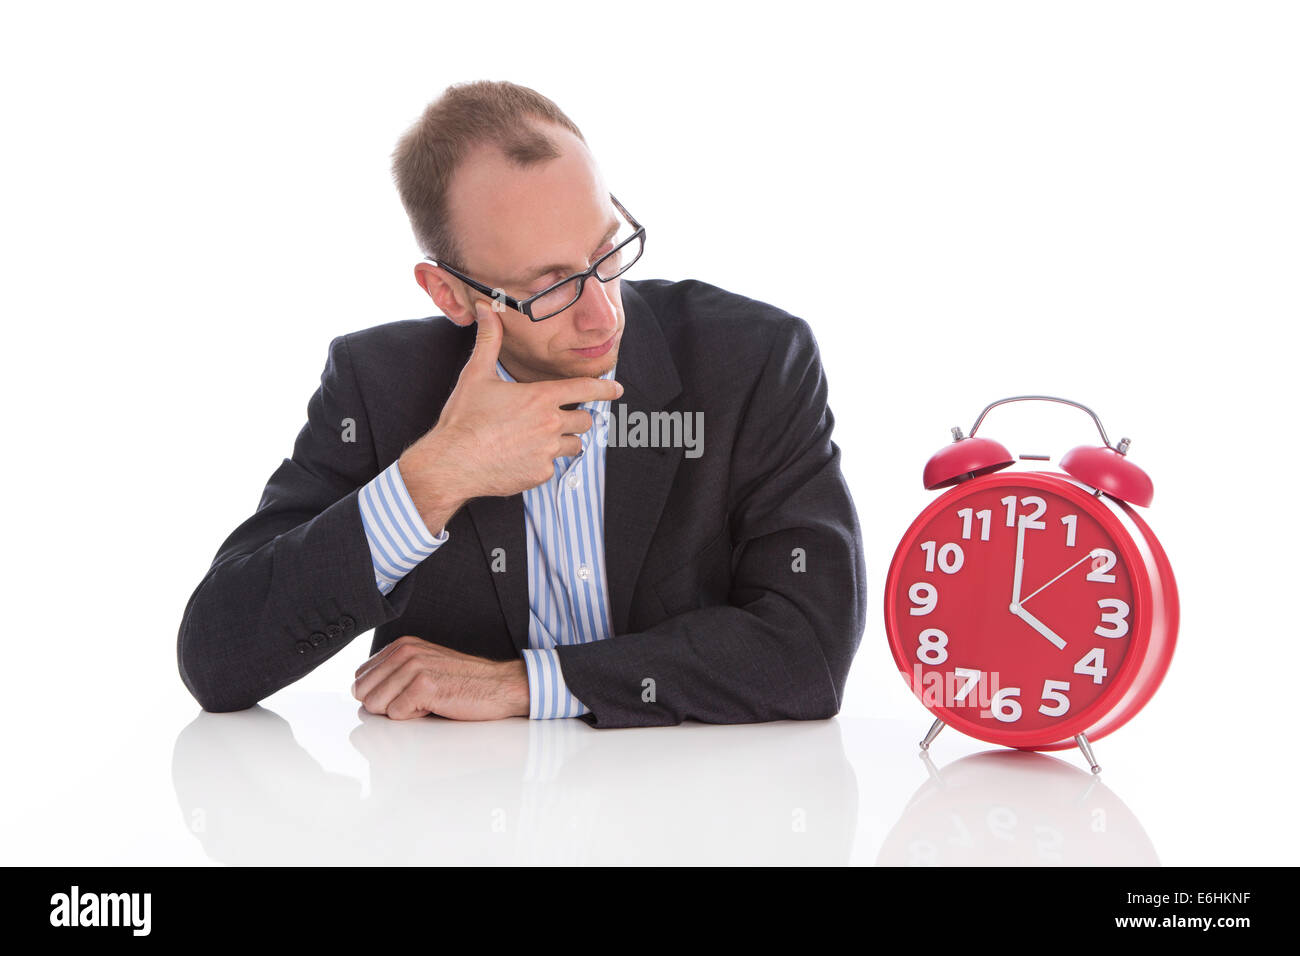 Closing time at four o'clock: isolated businessman looking pensive an unhappy at a red alarm clock. Stock Photo